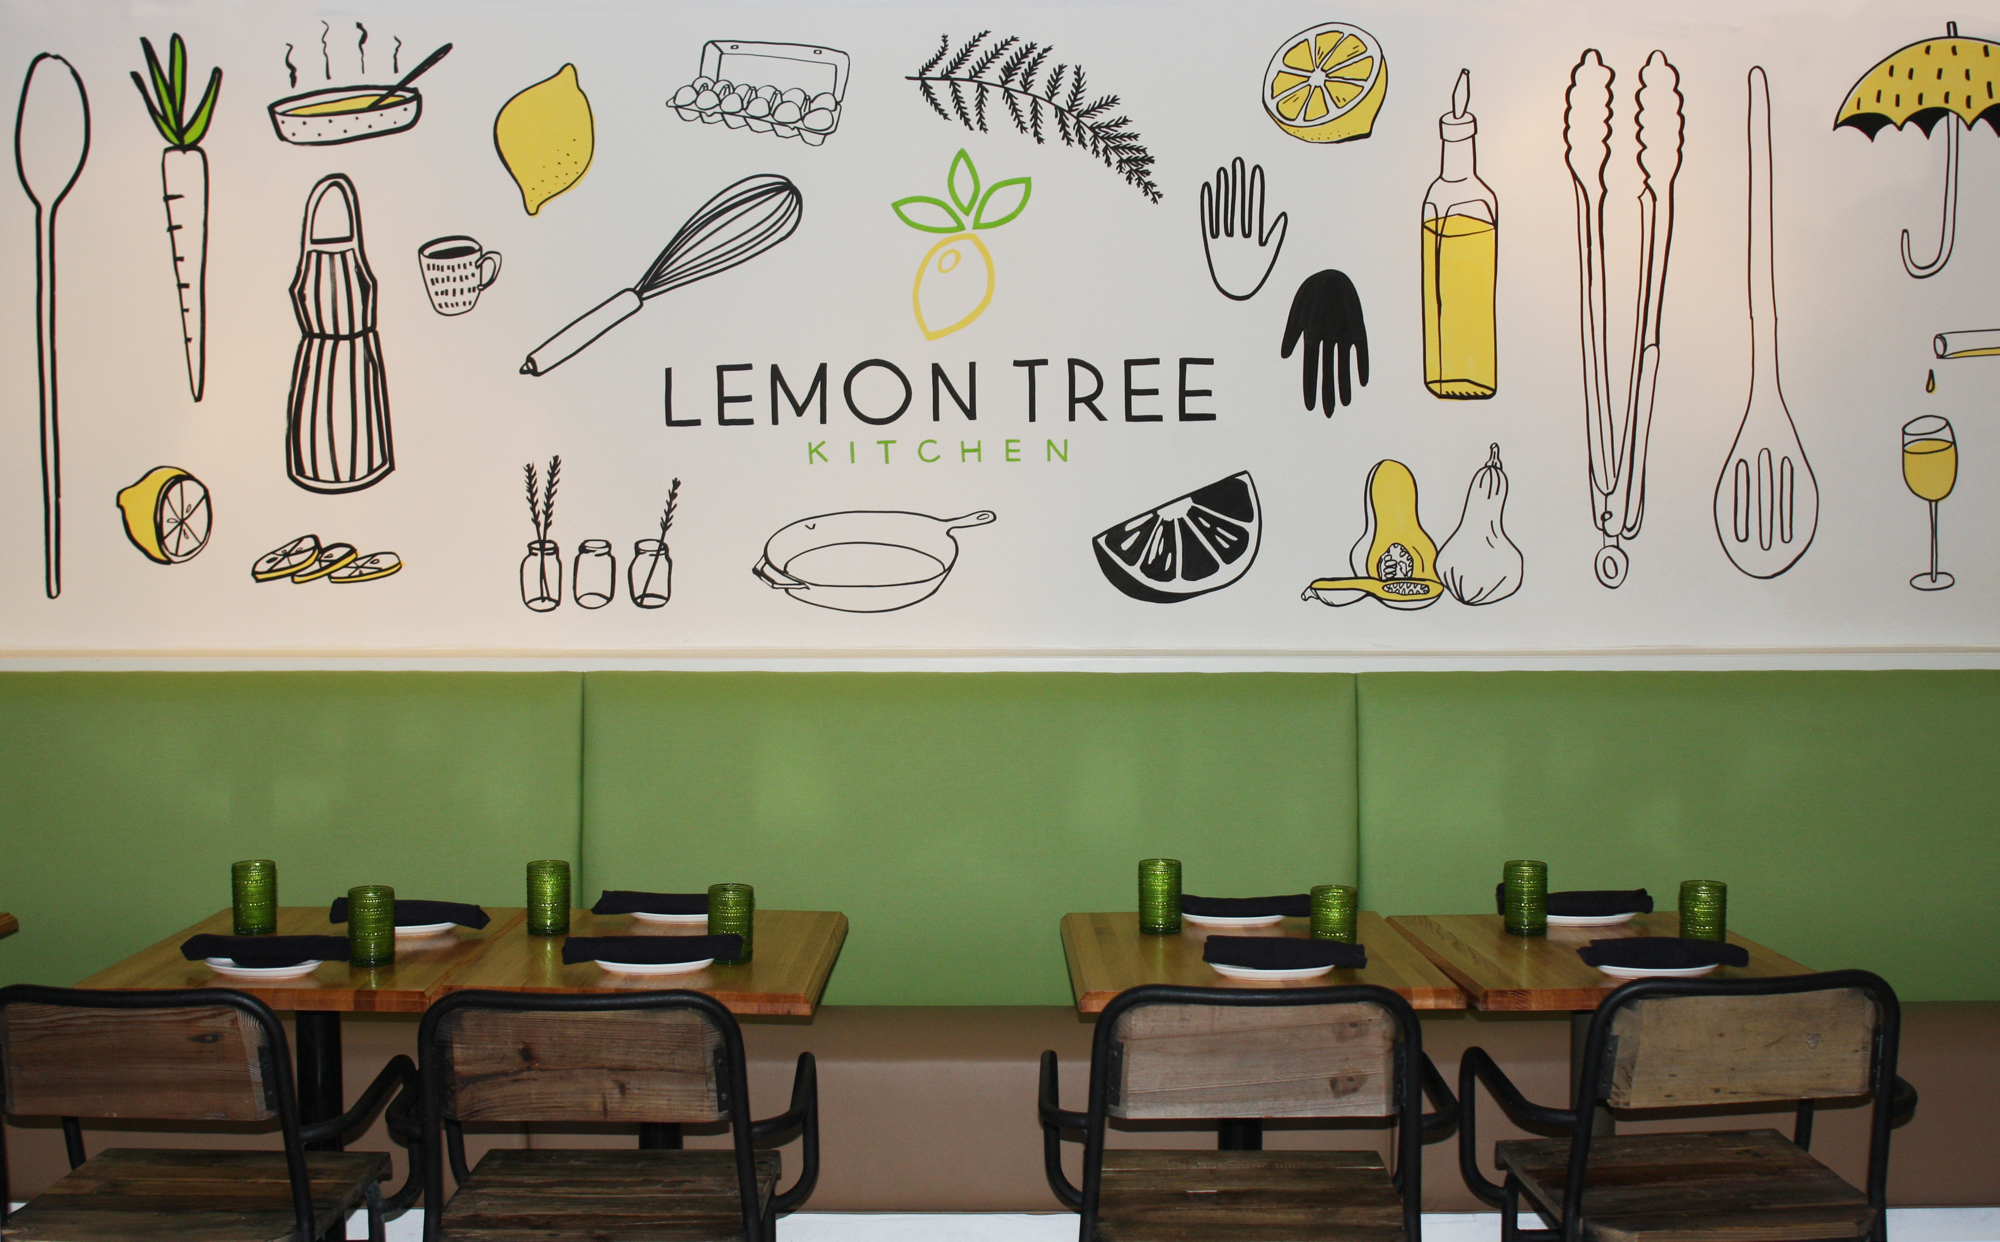 Lemon Tree Kitchen serves lunch, dinner, drinks and coffee in the storefront previously occupied by Louies Modern. Photo by Su Byron